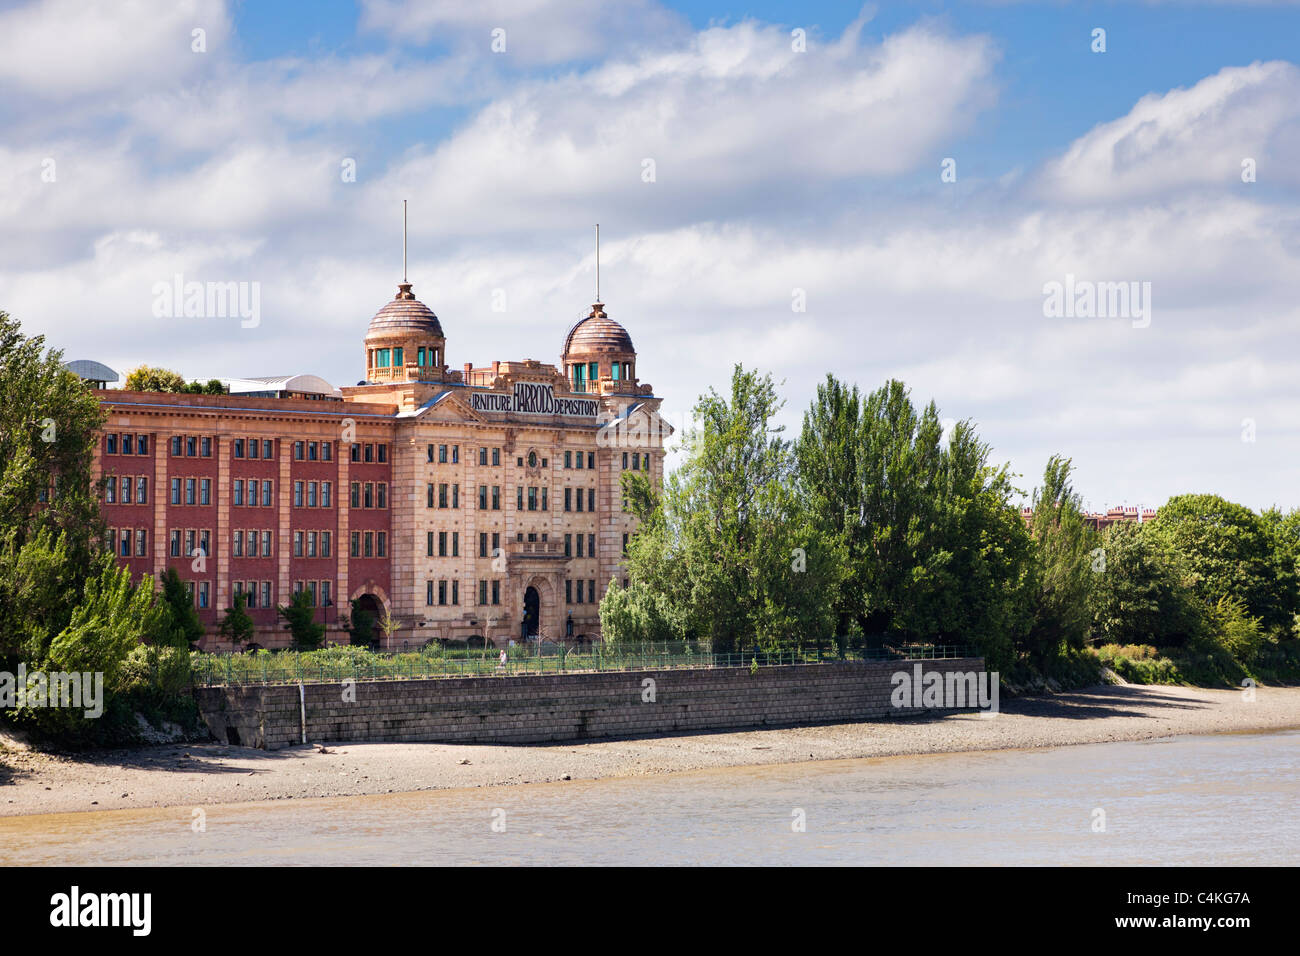 Harrods Furniture Depository building on the River Thames London England UK Stock Photo